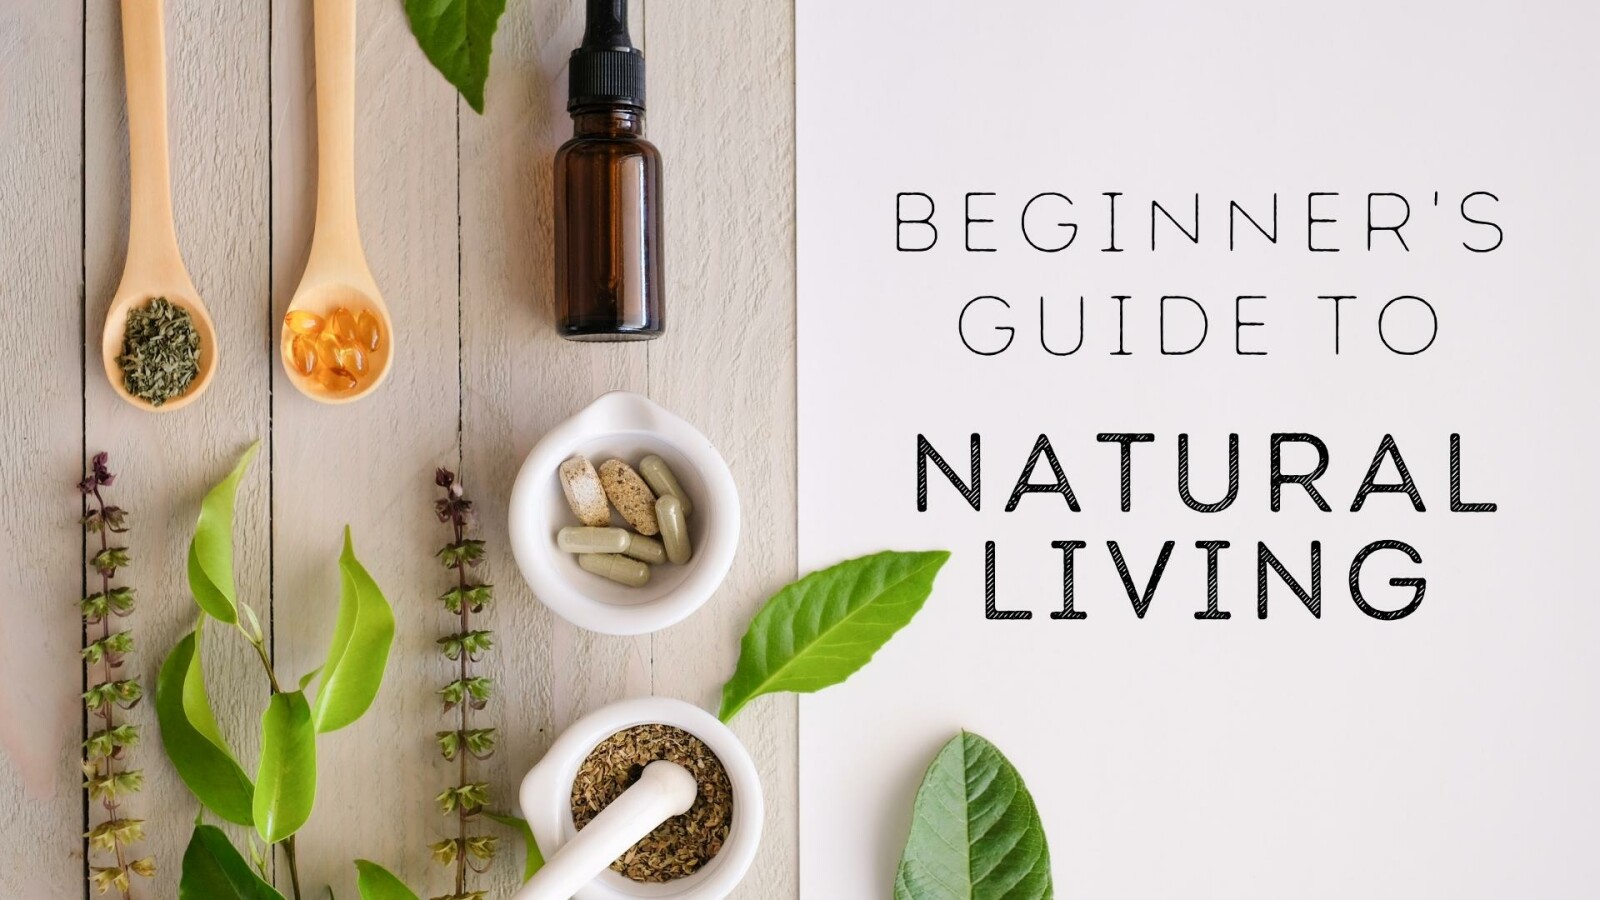 Are you ready to “go the natural route”?